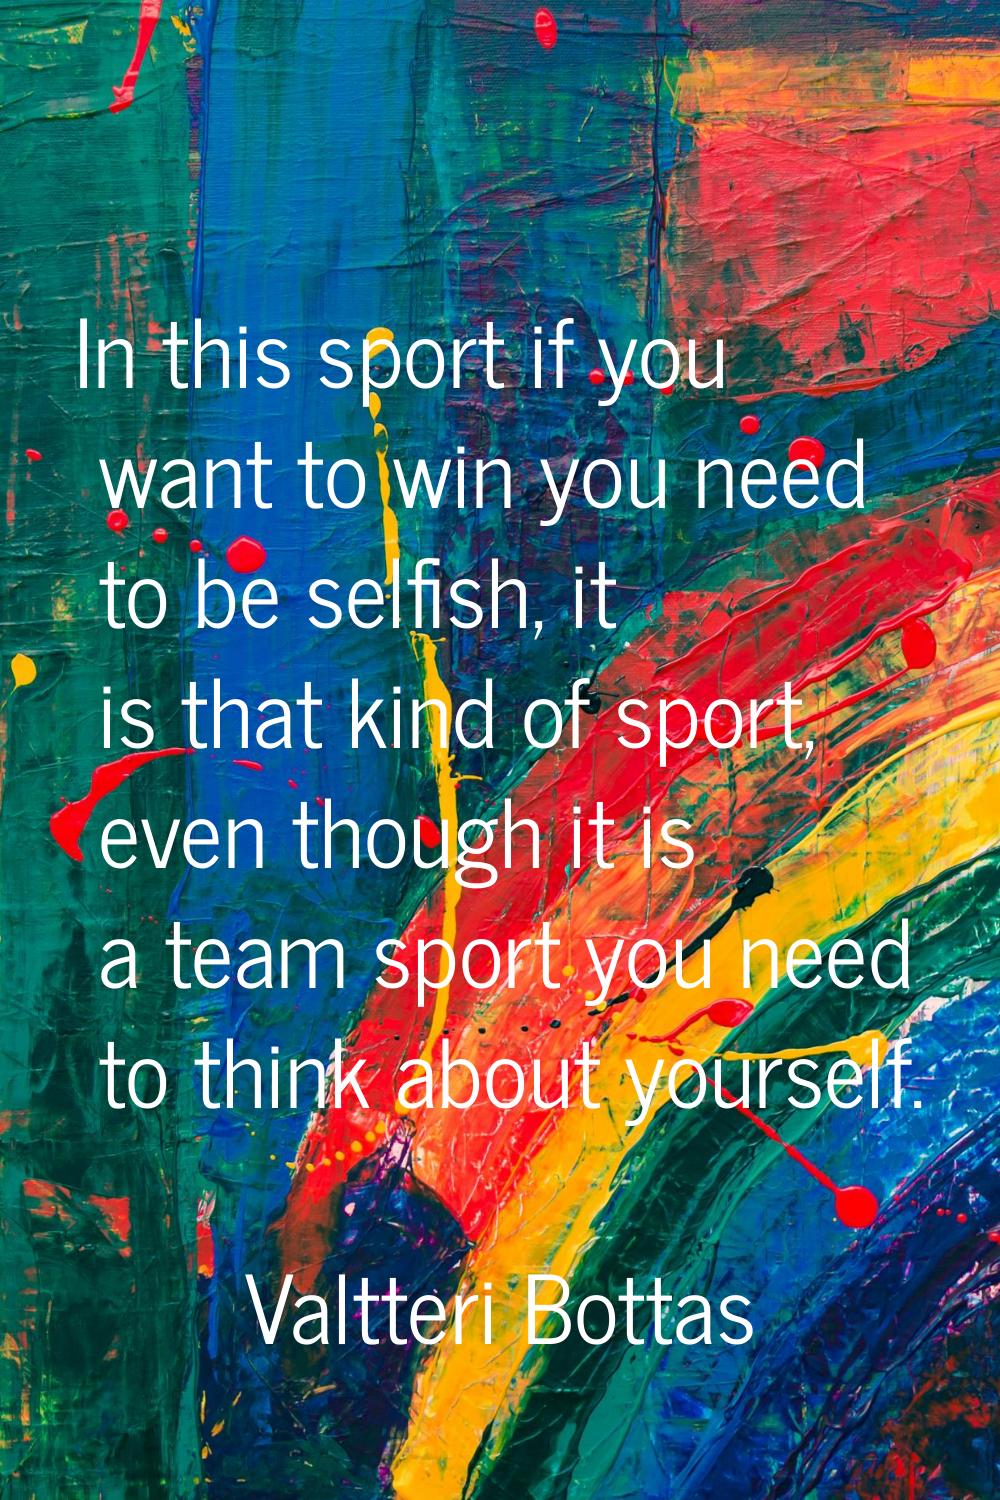 In this sport if you want to win you need to be selfish, it is that kind of sport, even though it i